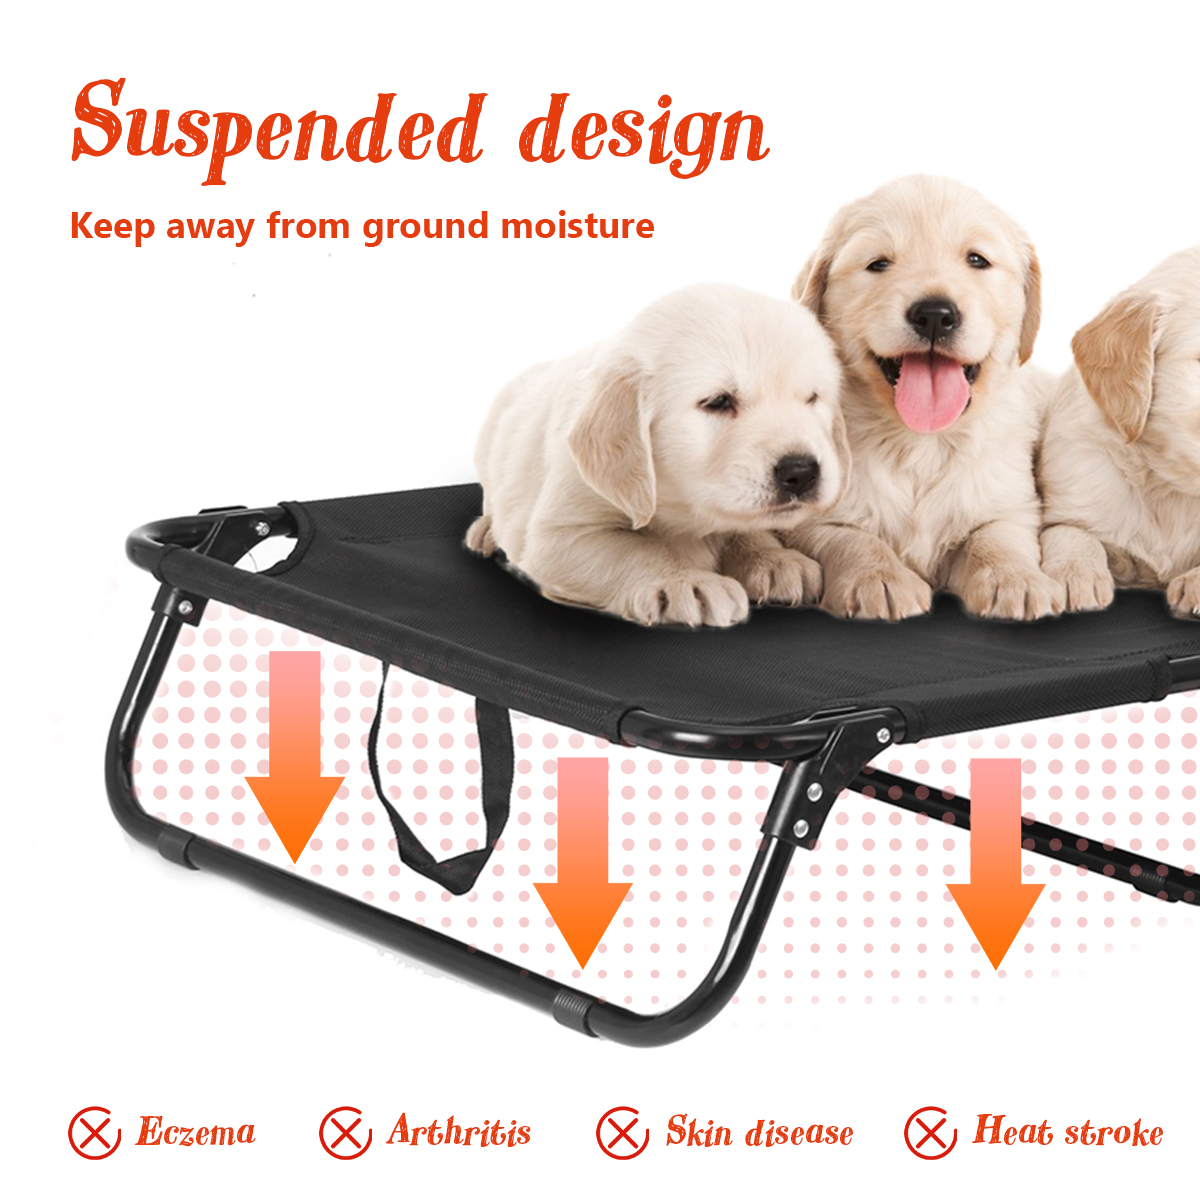 Elevated-Pet-Bed-Dog-Cat-Cooling-Lounger-Folding-Breathable-Mesh-Mat-Foldable-Removable-1958678-2